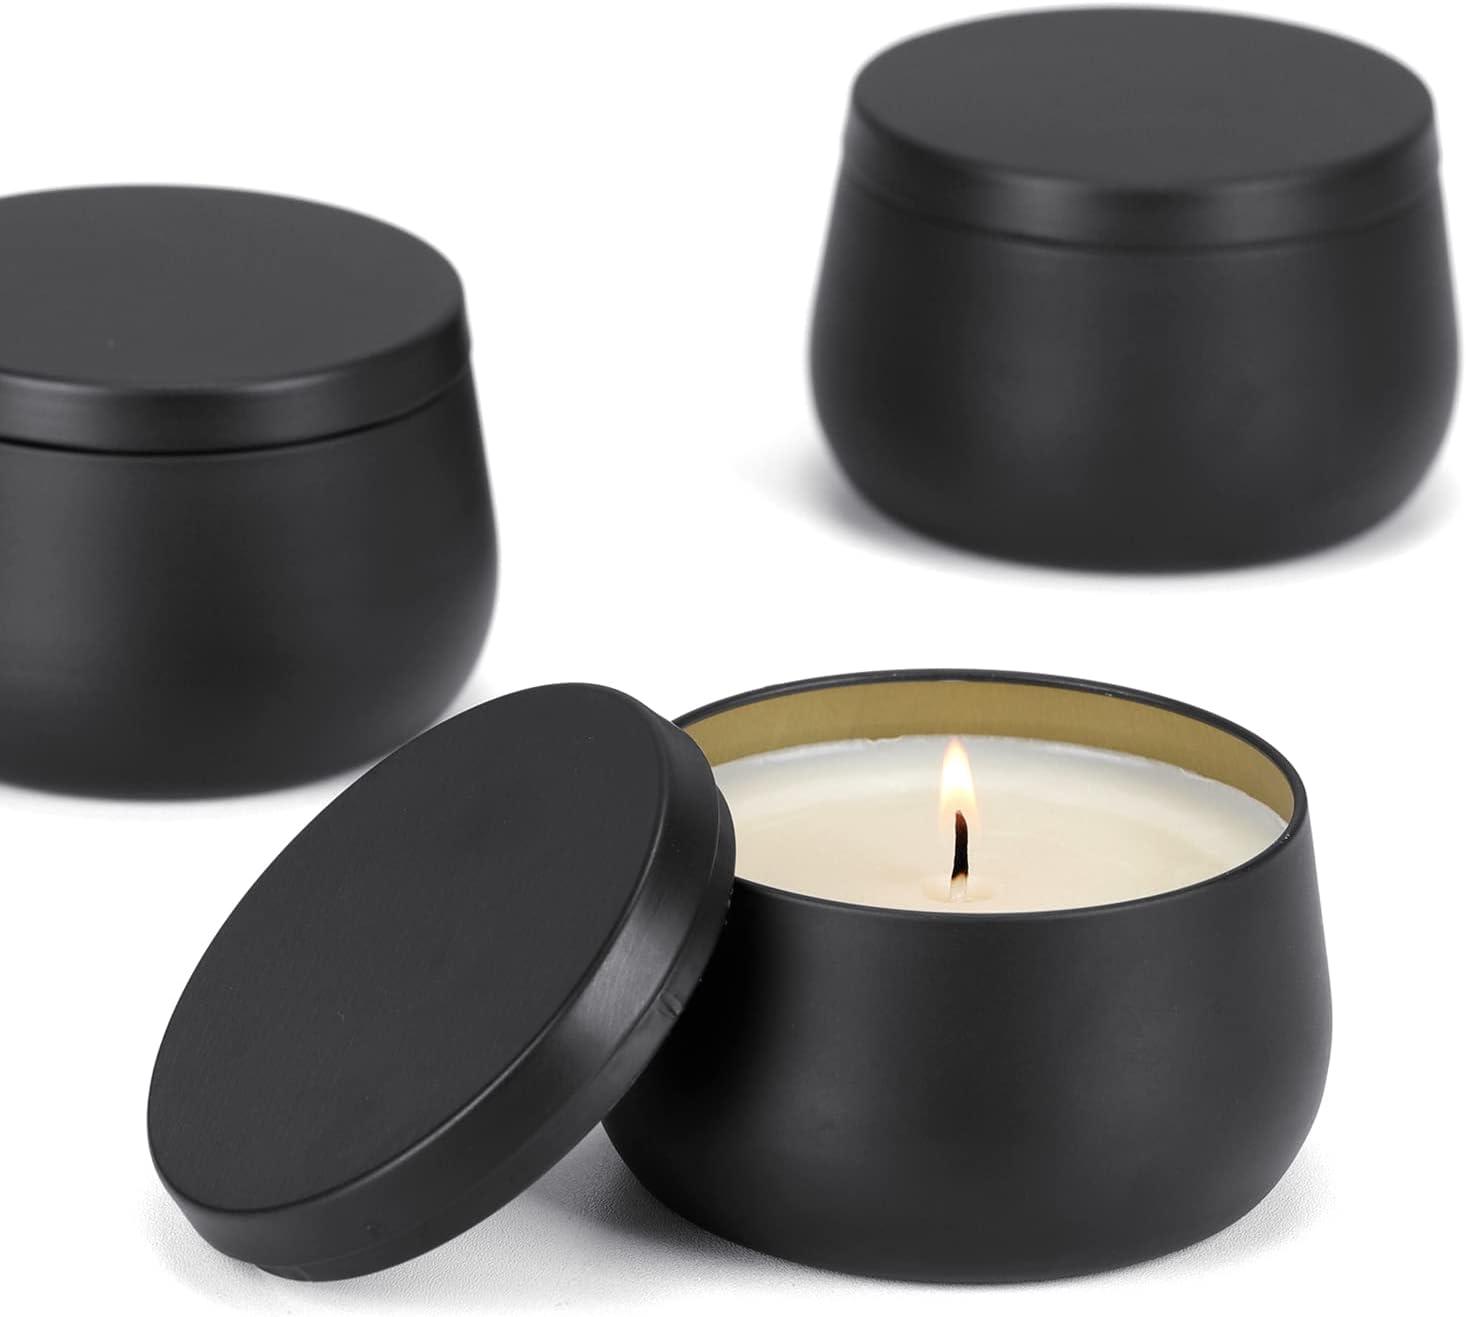 ZOENHOU 60 Pack 4 Oz Candle Tins, Round Empty Metal Tins with Lids,  Portable Metal Storage Candle Containers, CandleJars for Making Candles,  Black